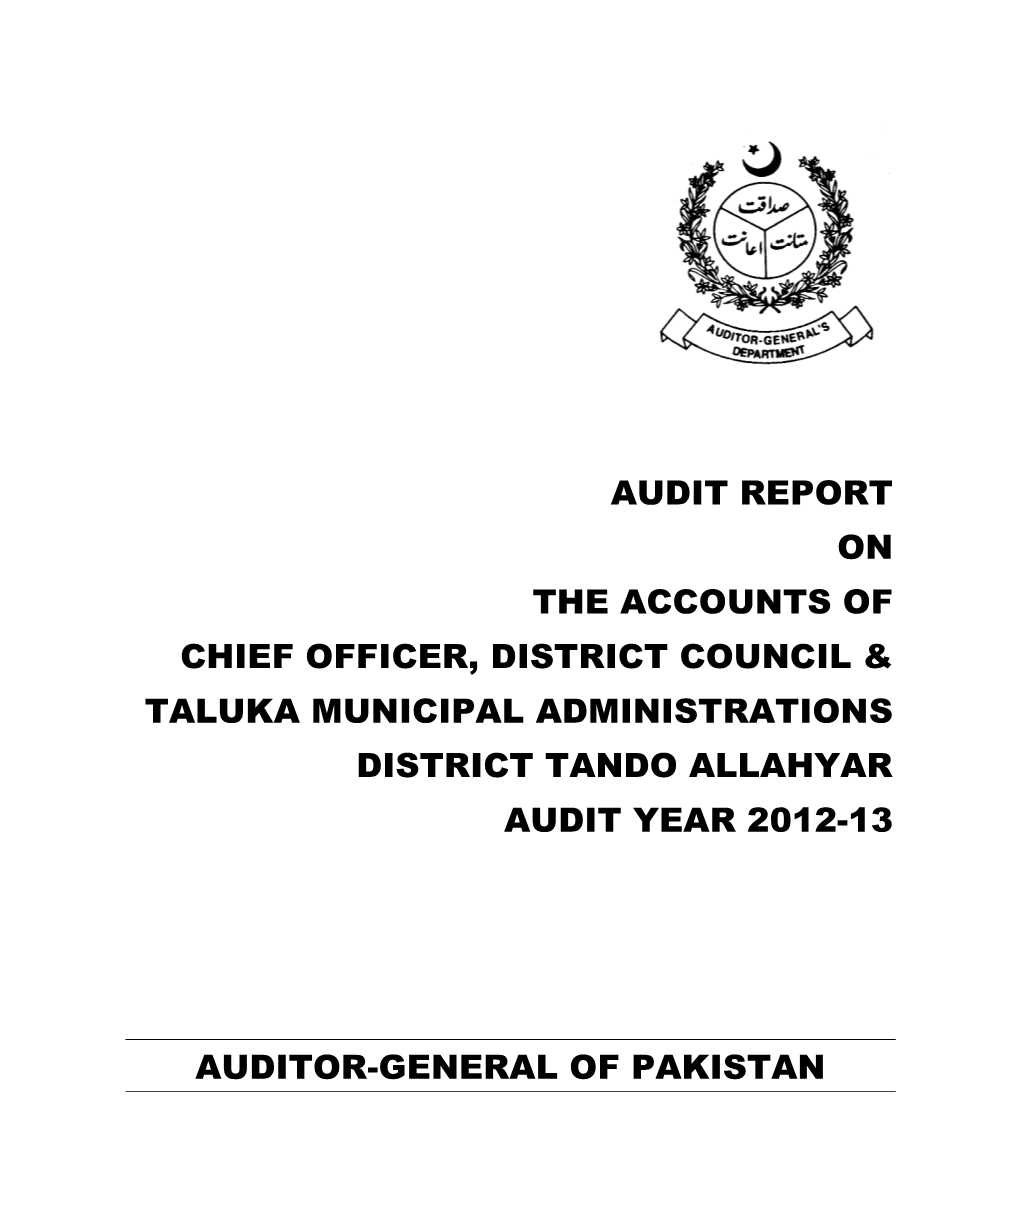 Audit Report on the Accounts of Chief Officer, District Council & Taluka Municipal Administrations District Tando Allahyar Audit Year 2012-13